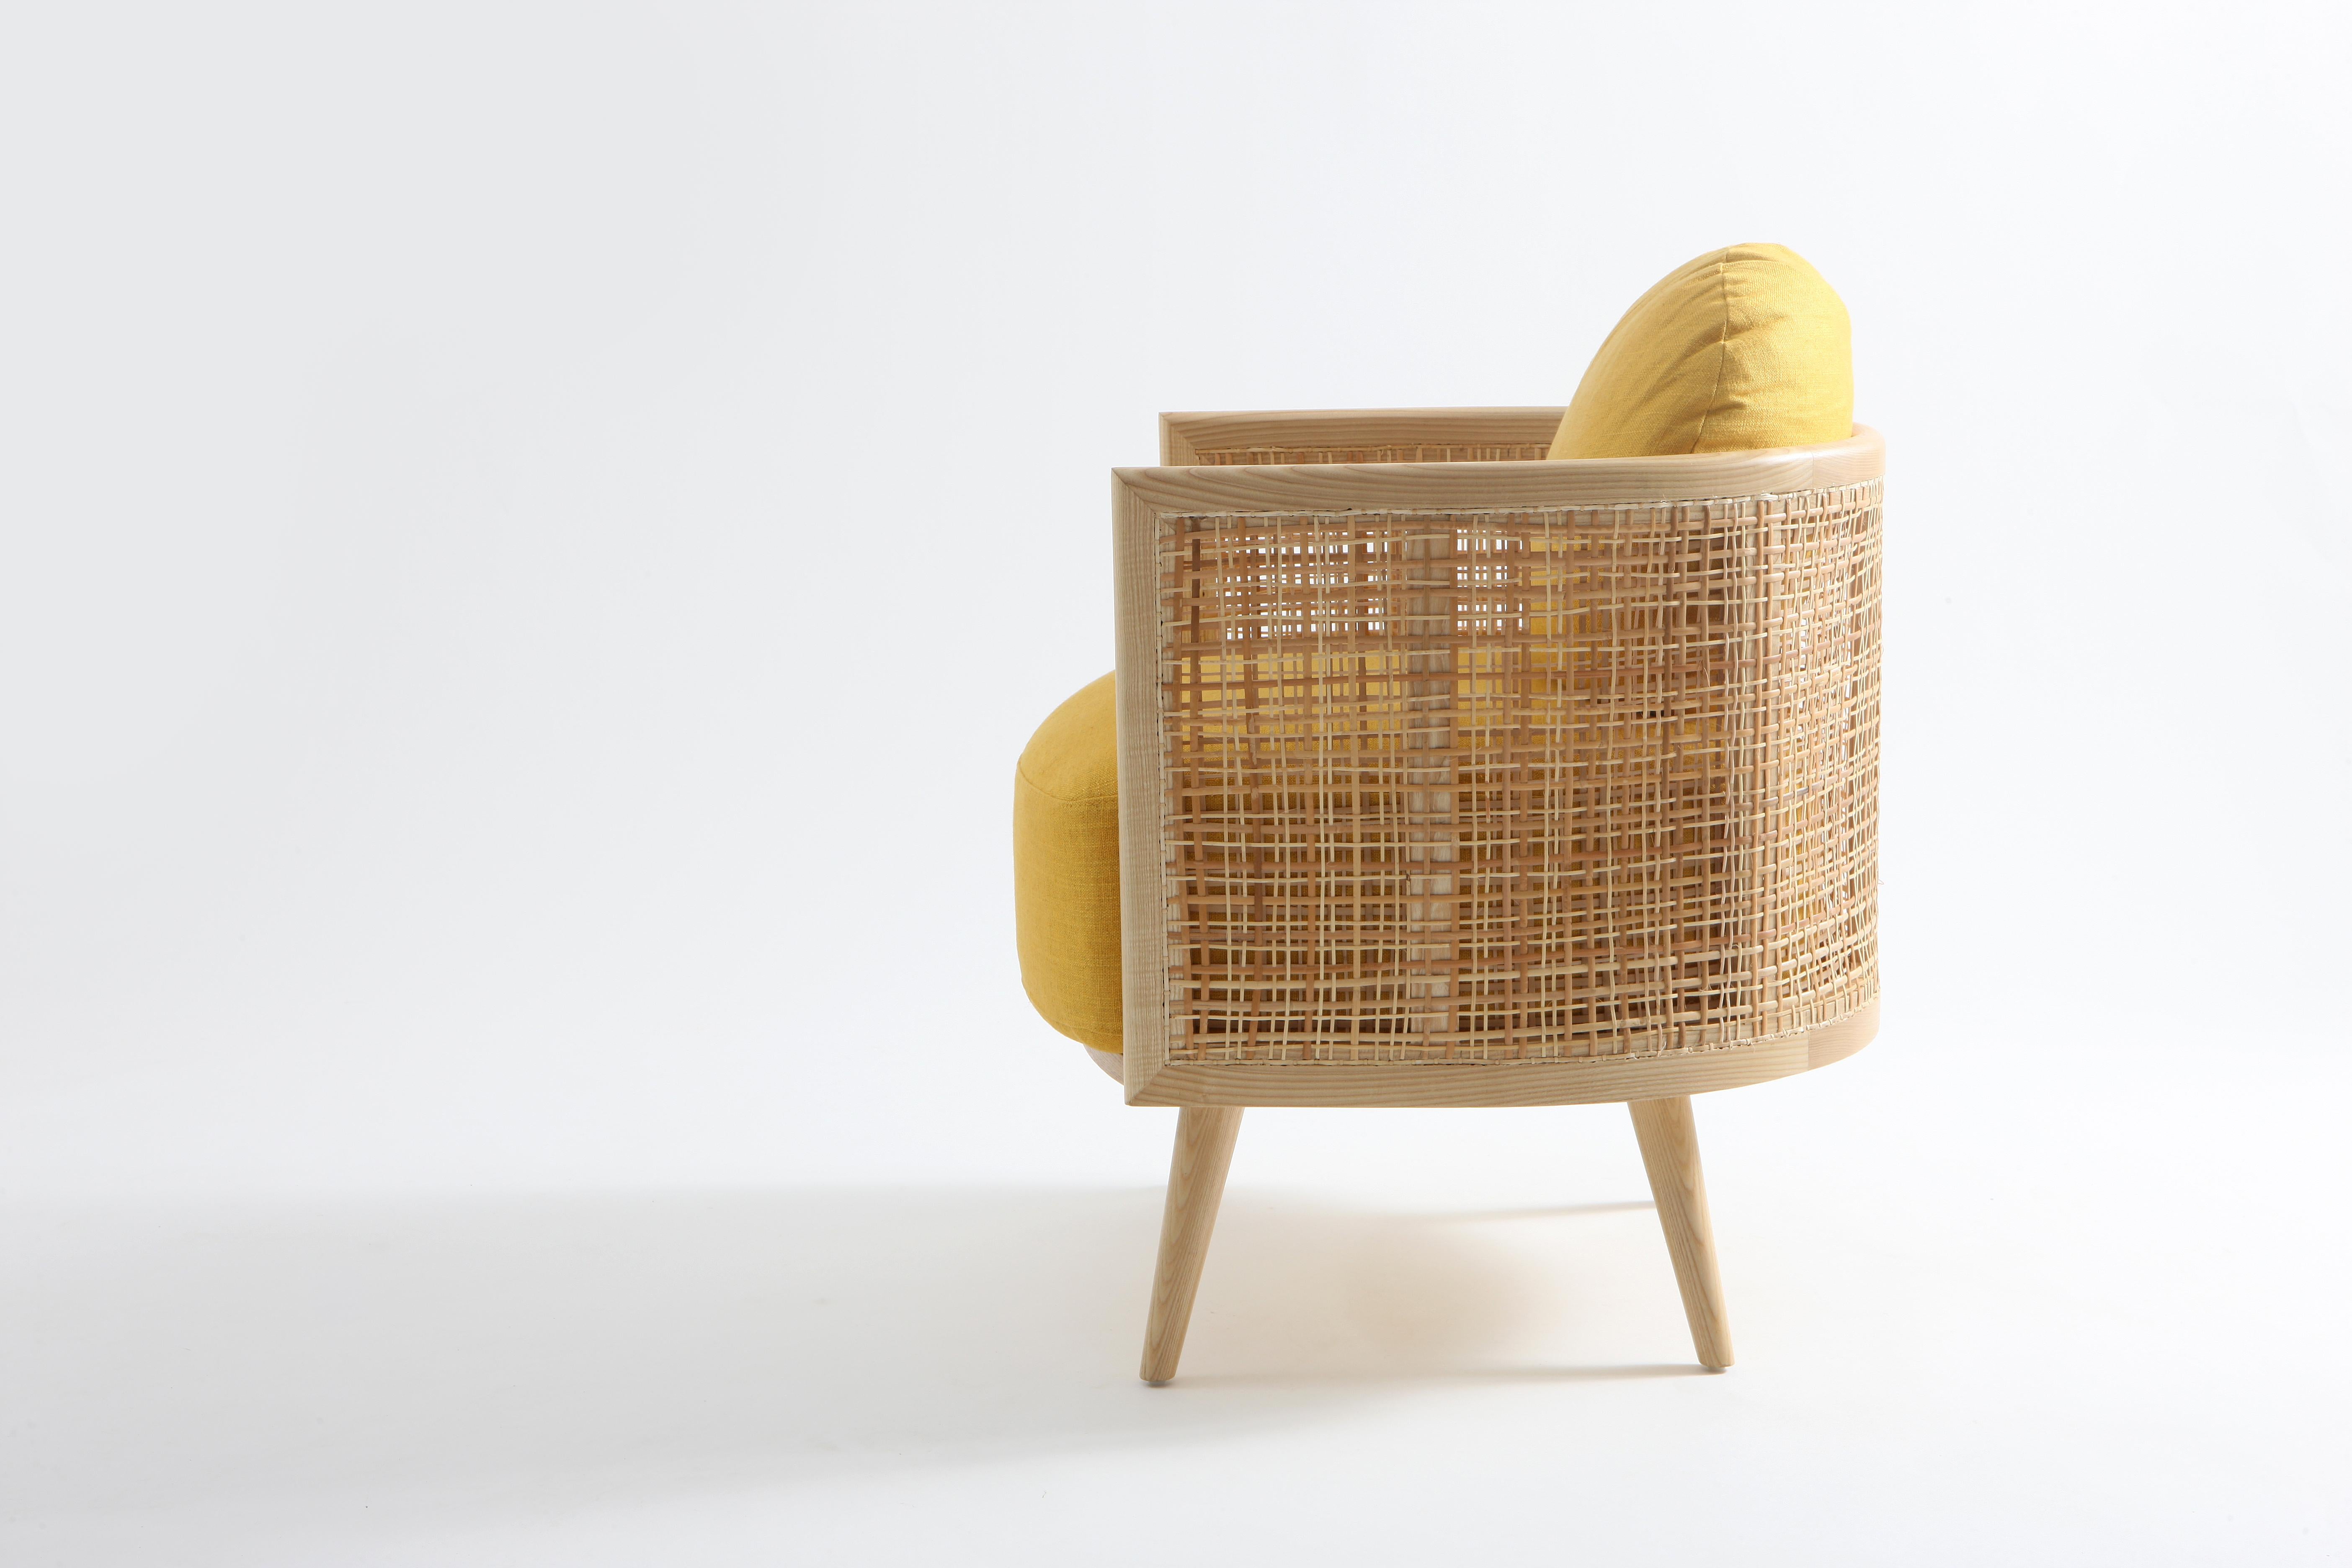 The Summerland armchair is crafted from solid ash wood with a textured straw weave back. A plush upholstered seat provides a high degree of seating comfort.